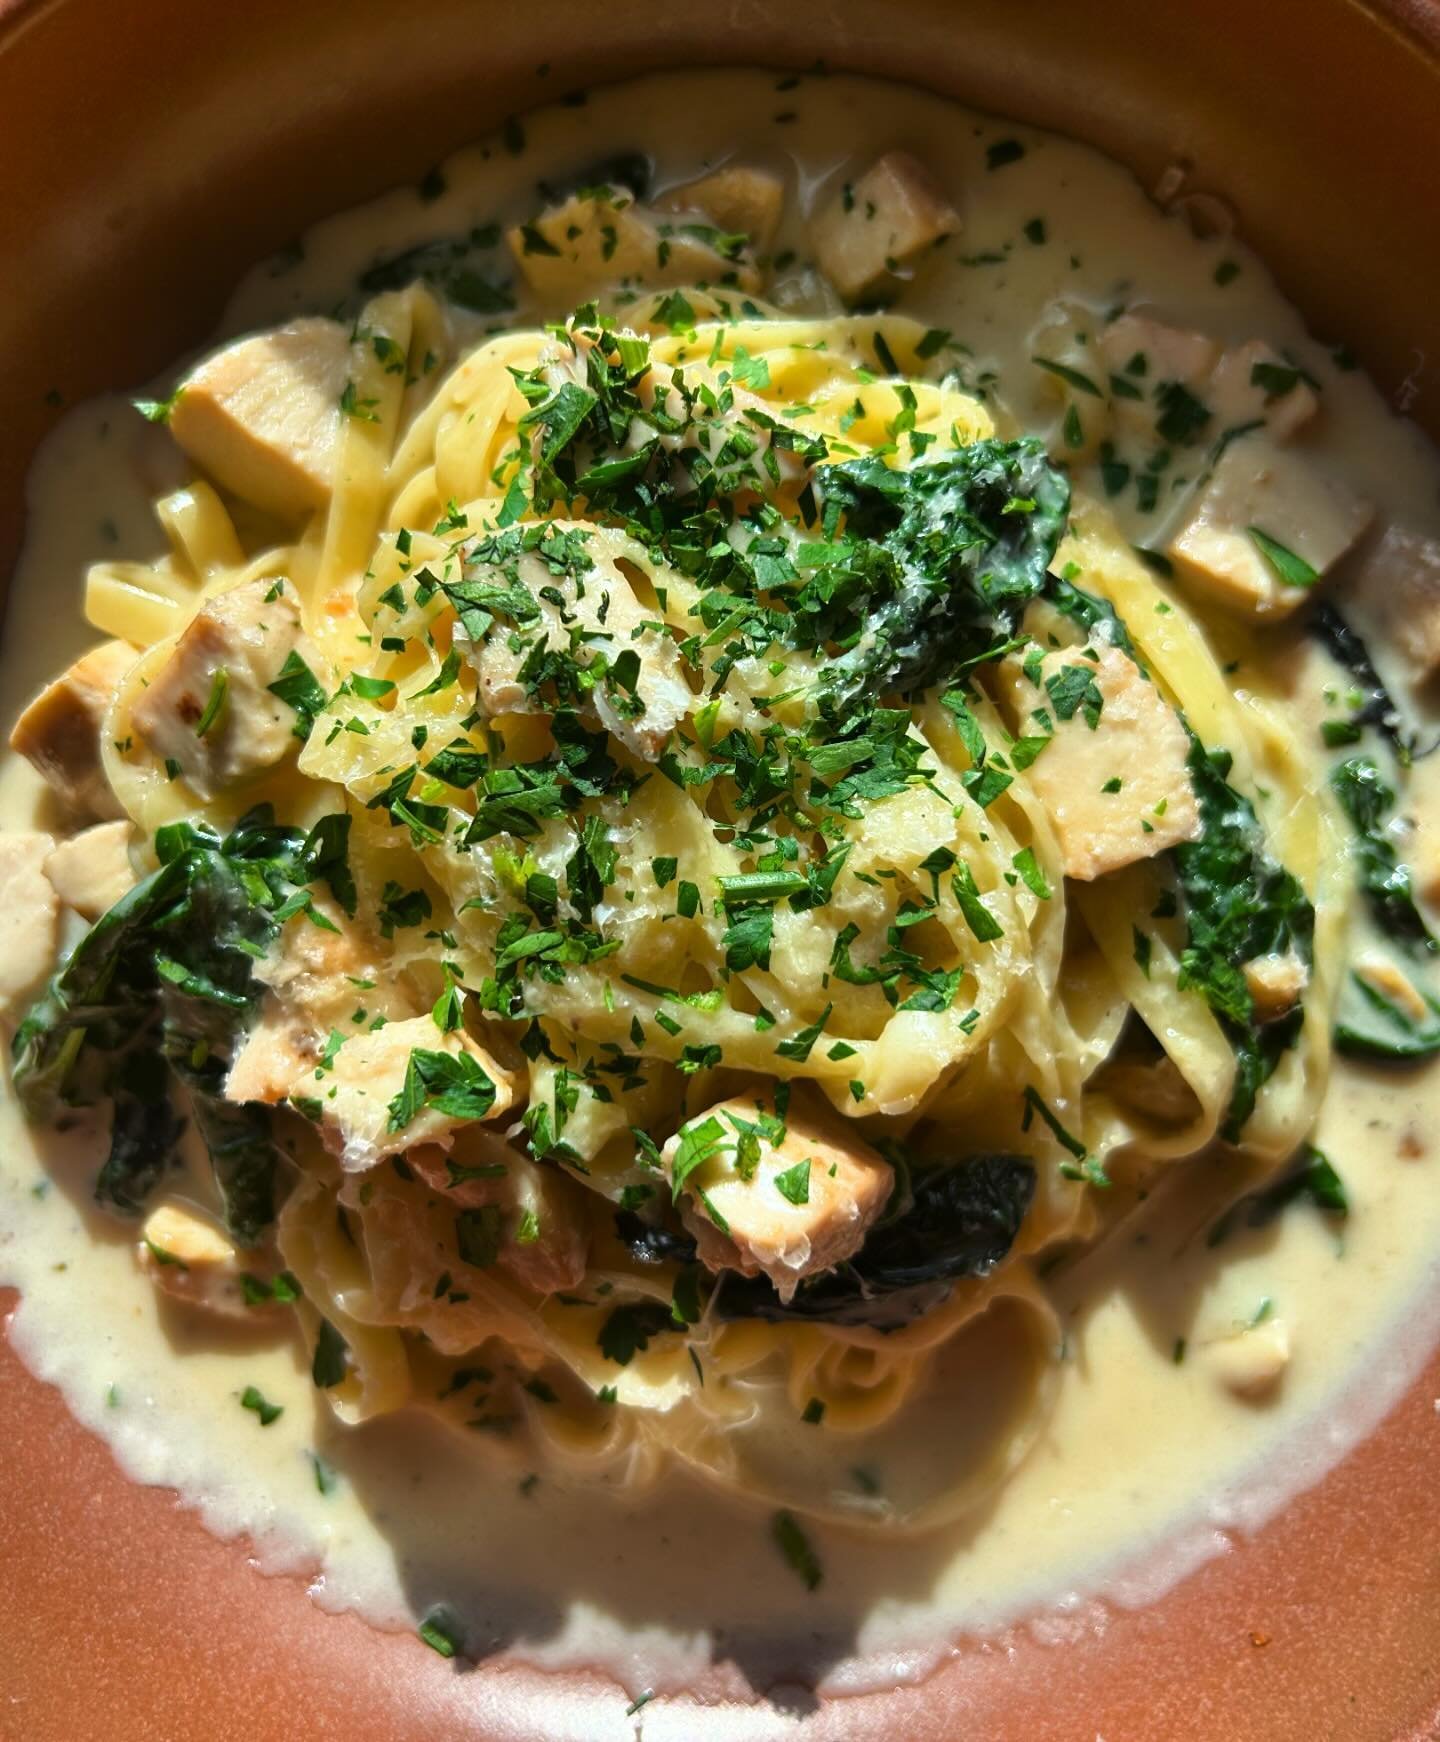 It&rsquo;s Fettuccini Friday! Available NOW at both The Grove + Old Bend 🥹 That&rsquo;s right&hellip;. you heard it here first 🙌🏼 House made alfredo, braised chicken, seasonal greens, parmigiano ✨ Available every day from 4-9pm!